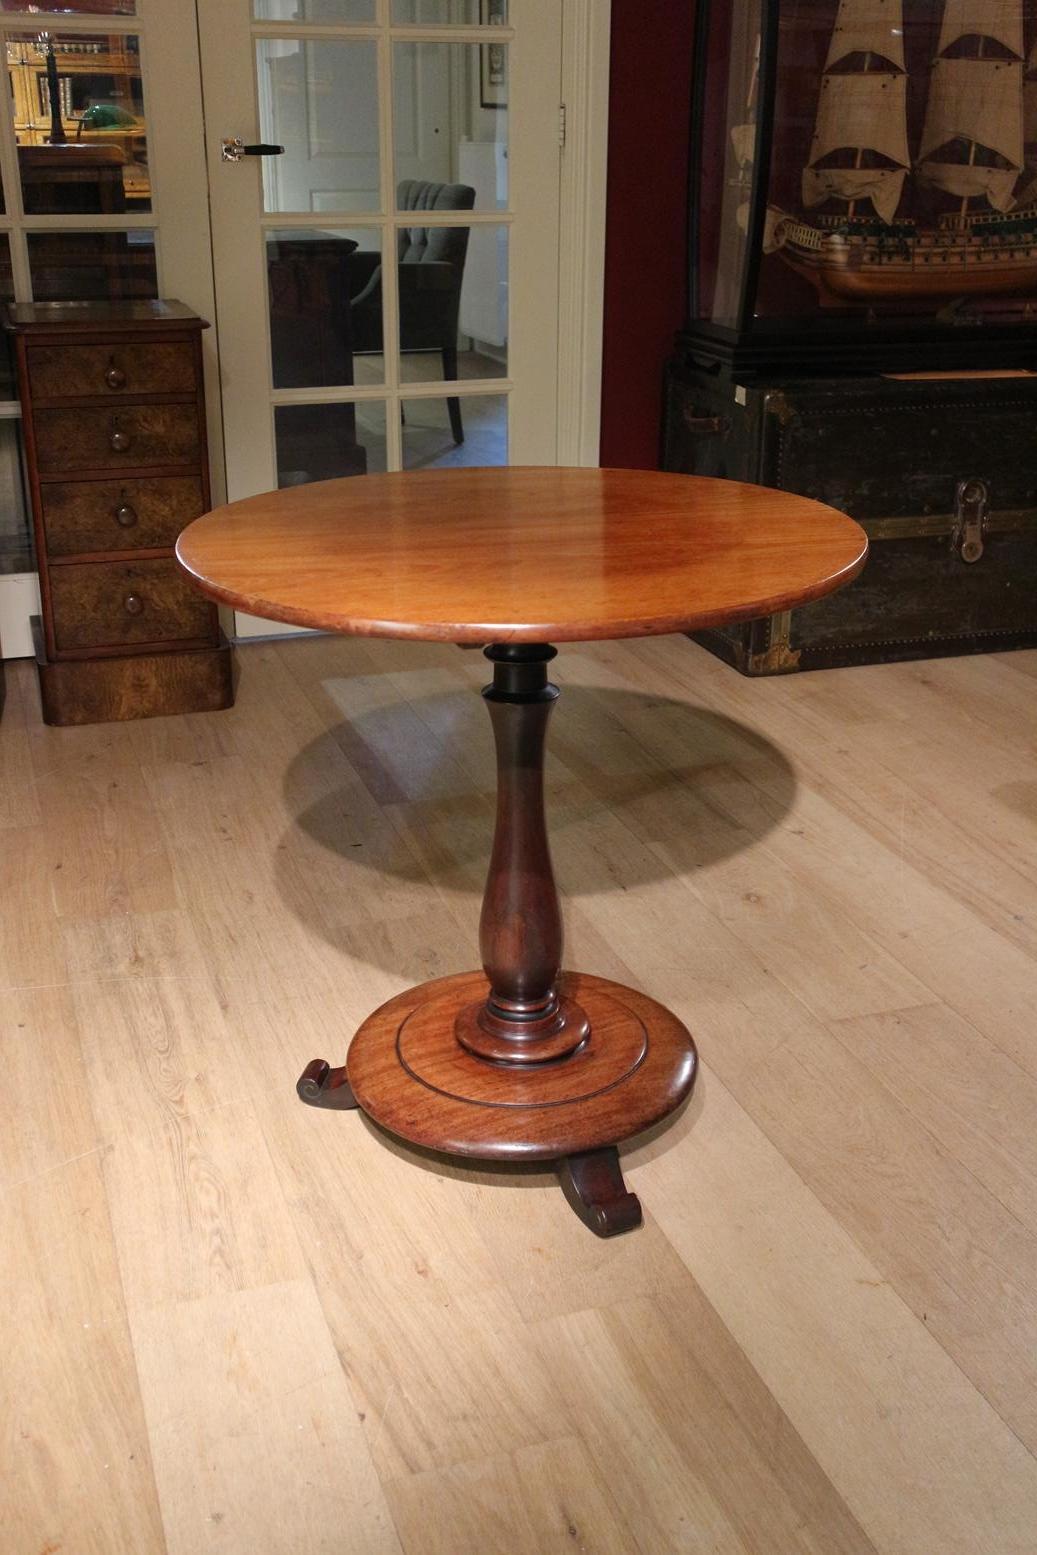 Antique round mahogany tilt top table in good and completely original condition. Warm color. Also very nice quality.

Origin: England
Period: Approx. 1840
Size: Diameter 72cm, height 73cm.